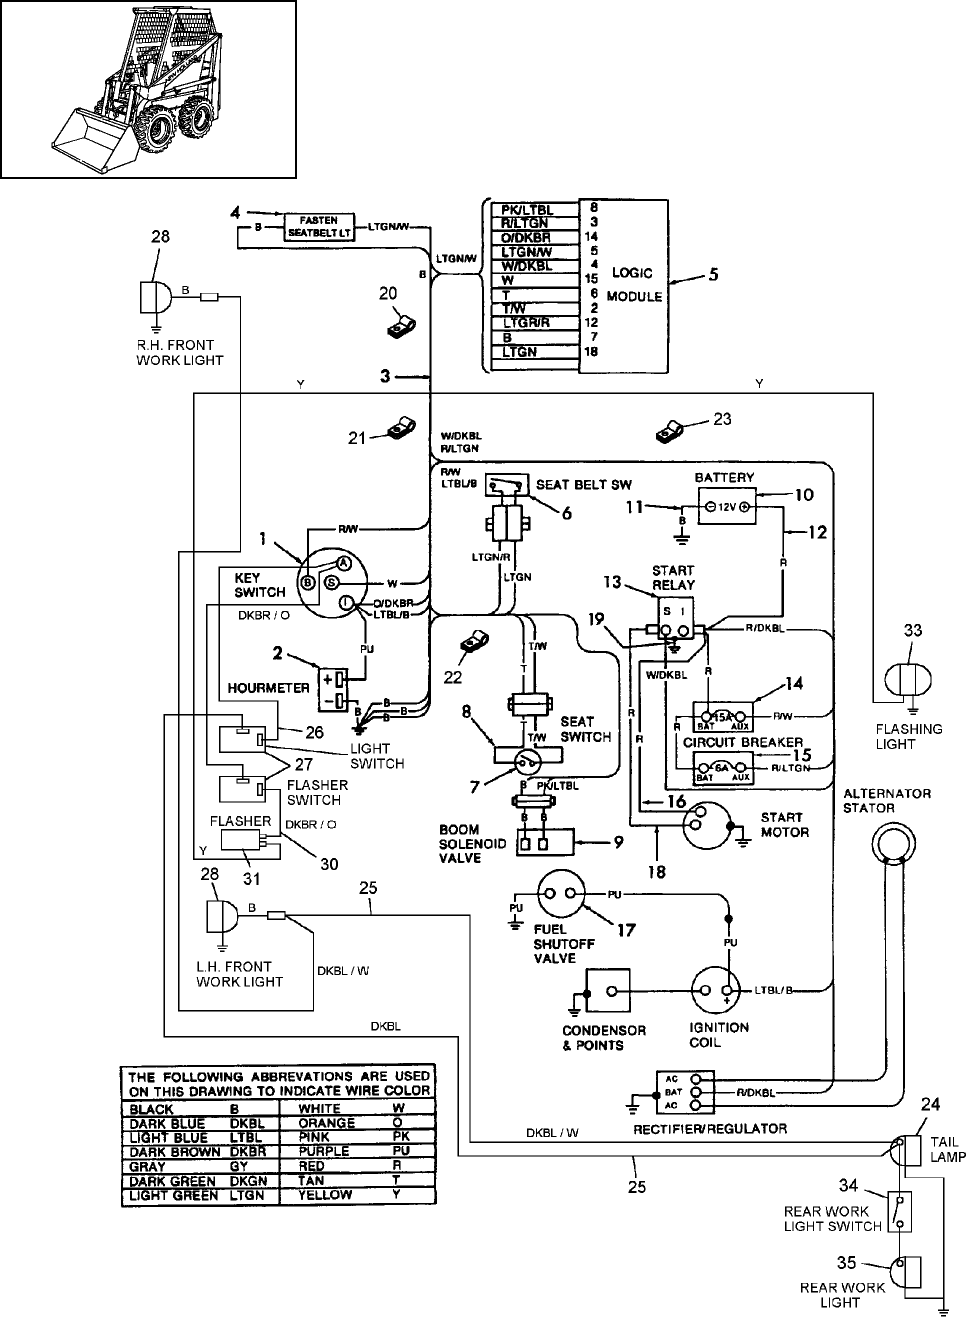 06.01 ELECTRICAL SCHEMATIC